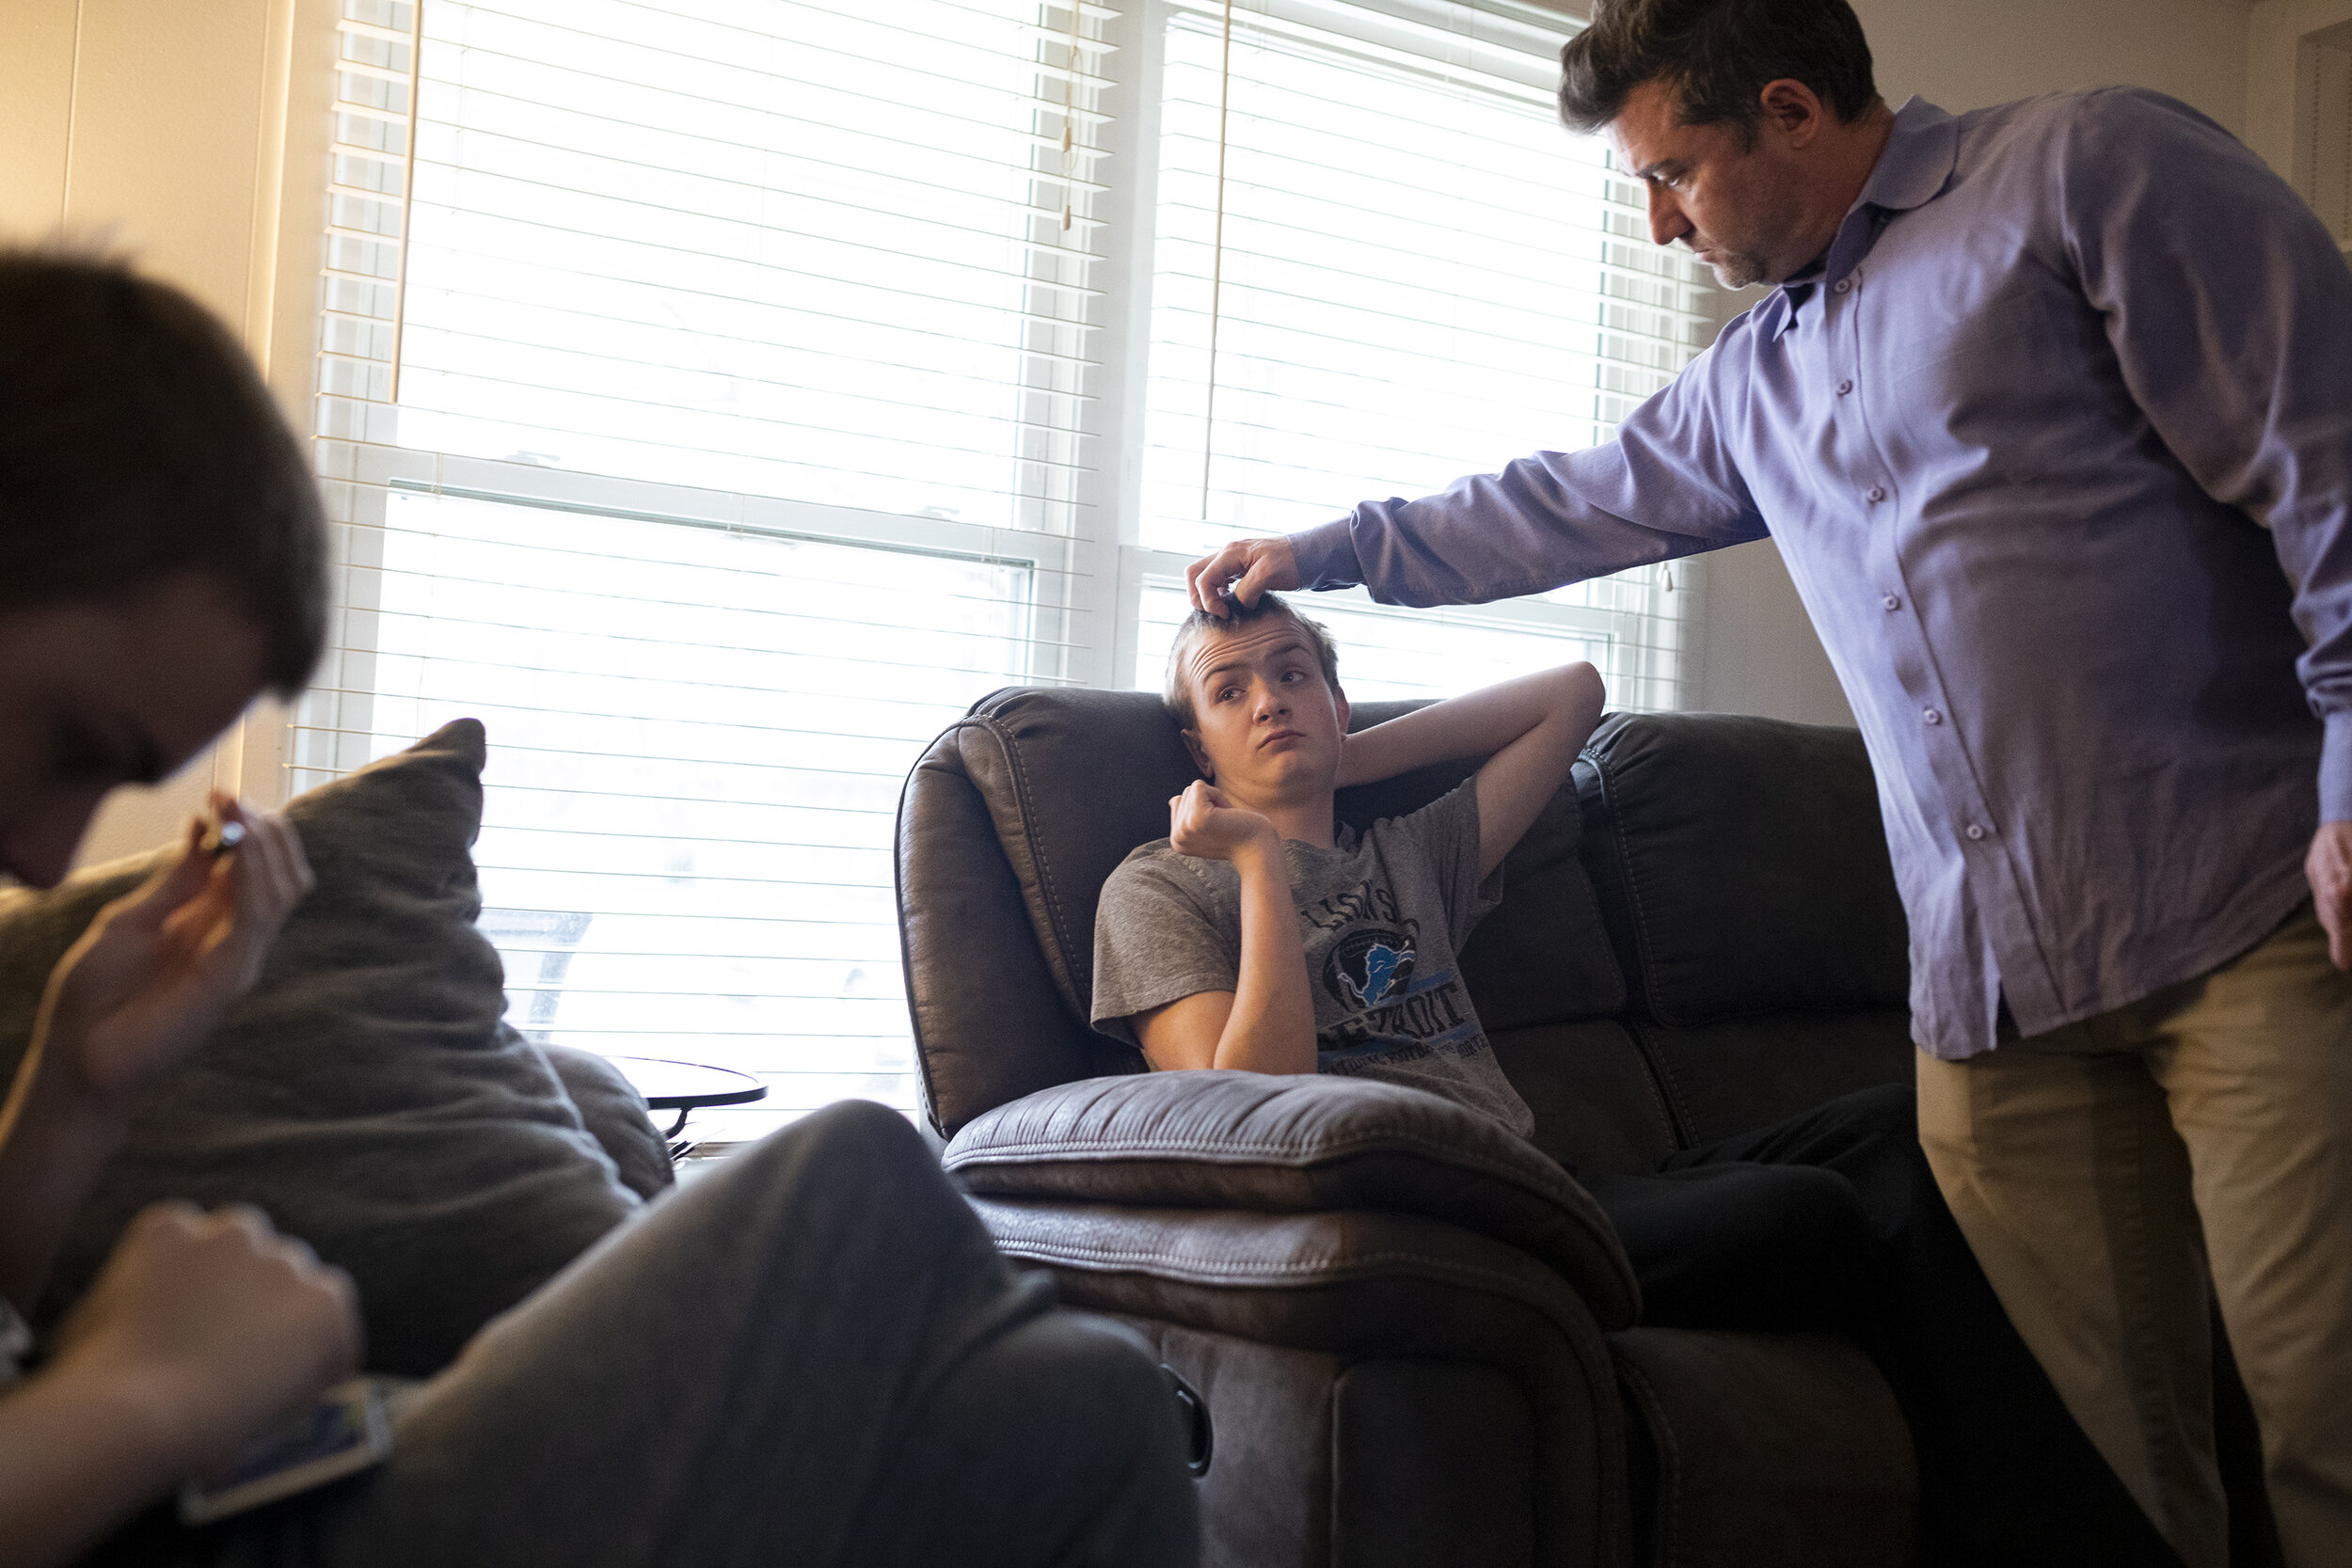  Bob Carleton scratches Jackson's head as Connor, left, reads on Wednesday, March 10, 2021, in Troy. Bob is a history teacher at Ernest W. Seaholm High School where his three son's regularly attend in person school, but due to the COVID-19 pandemic, 